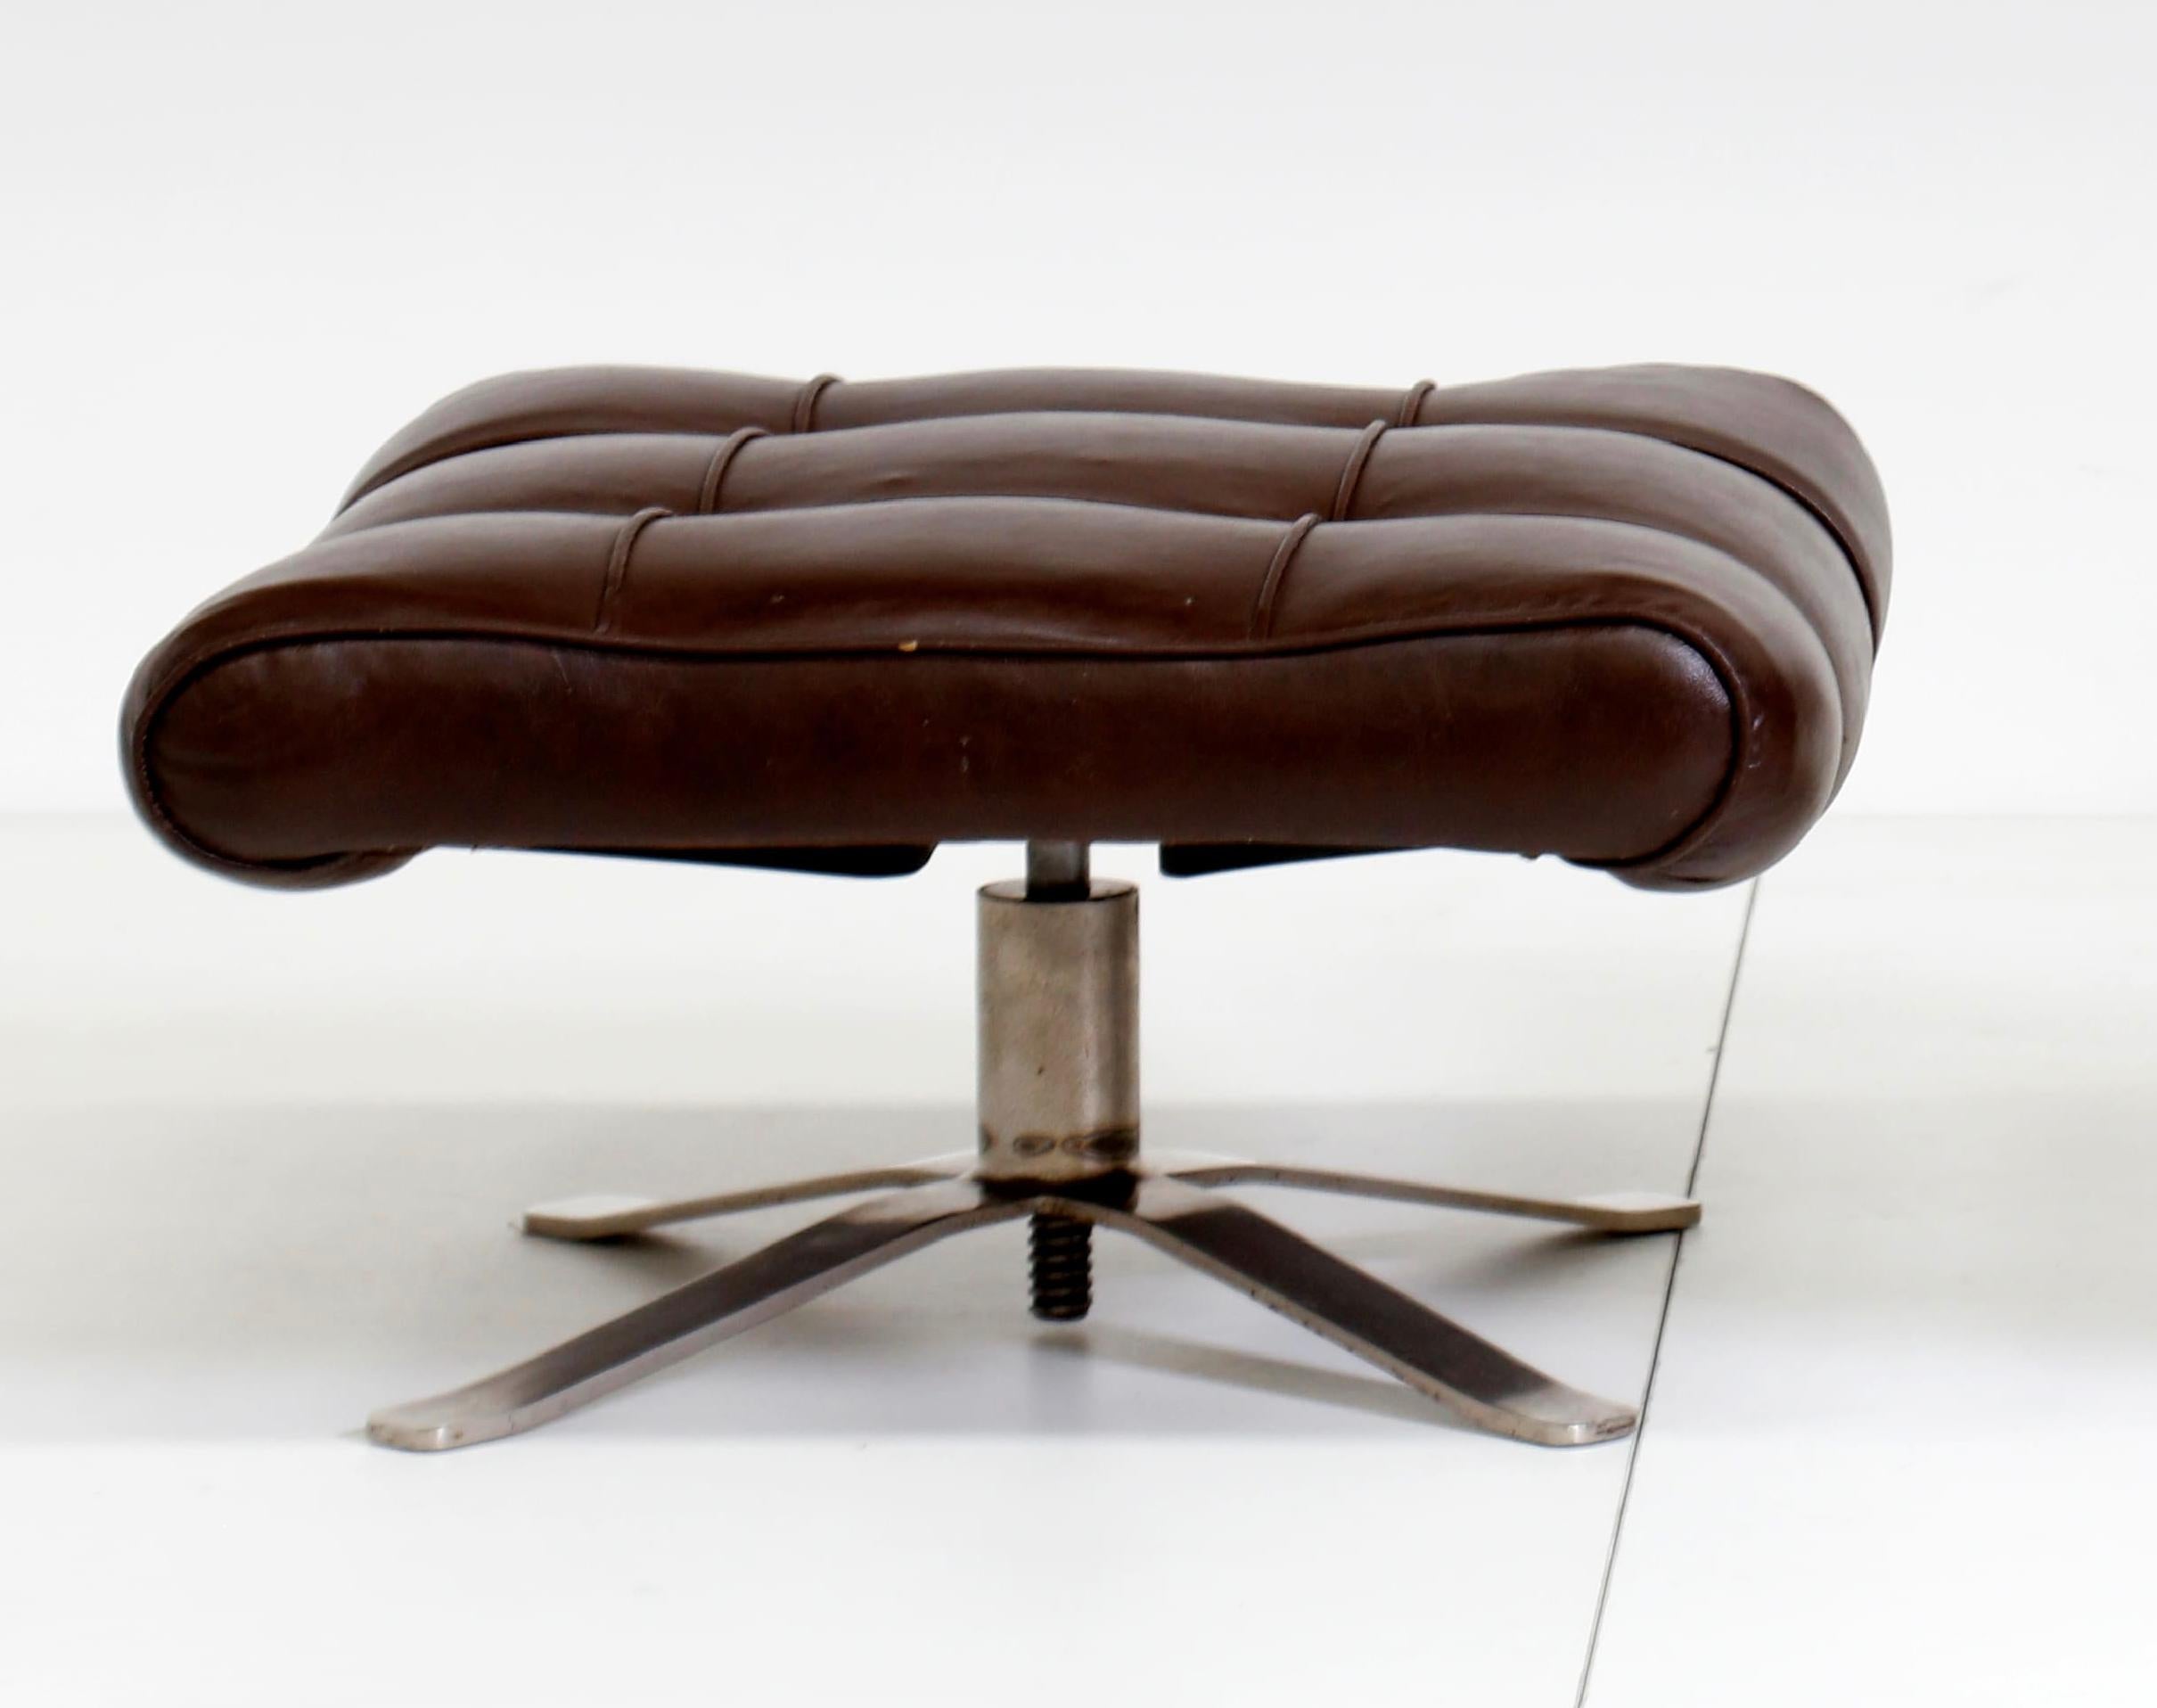 Vintage leather armchair with footrest is an original design work realized in Italy in the 1960s.

Original chrome-plated metal and Leather.

Made in Italy.

Total dimensions: cm 63 x 84 x 80.

Excellent conditions.